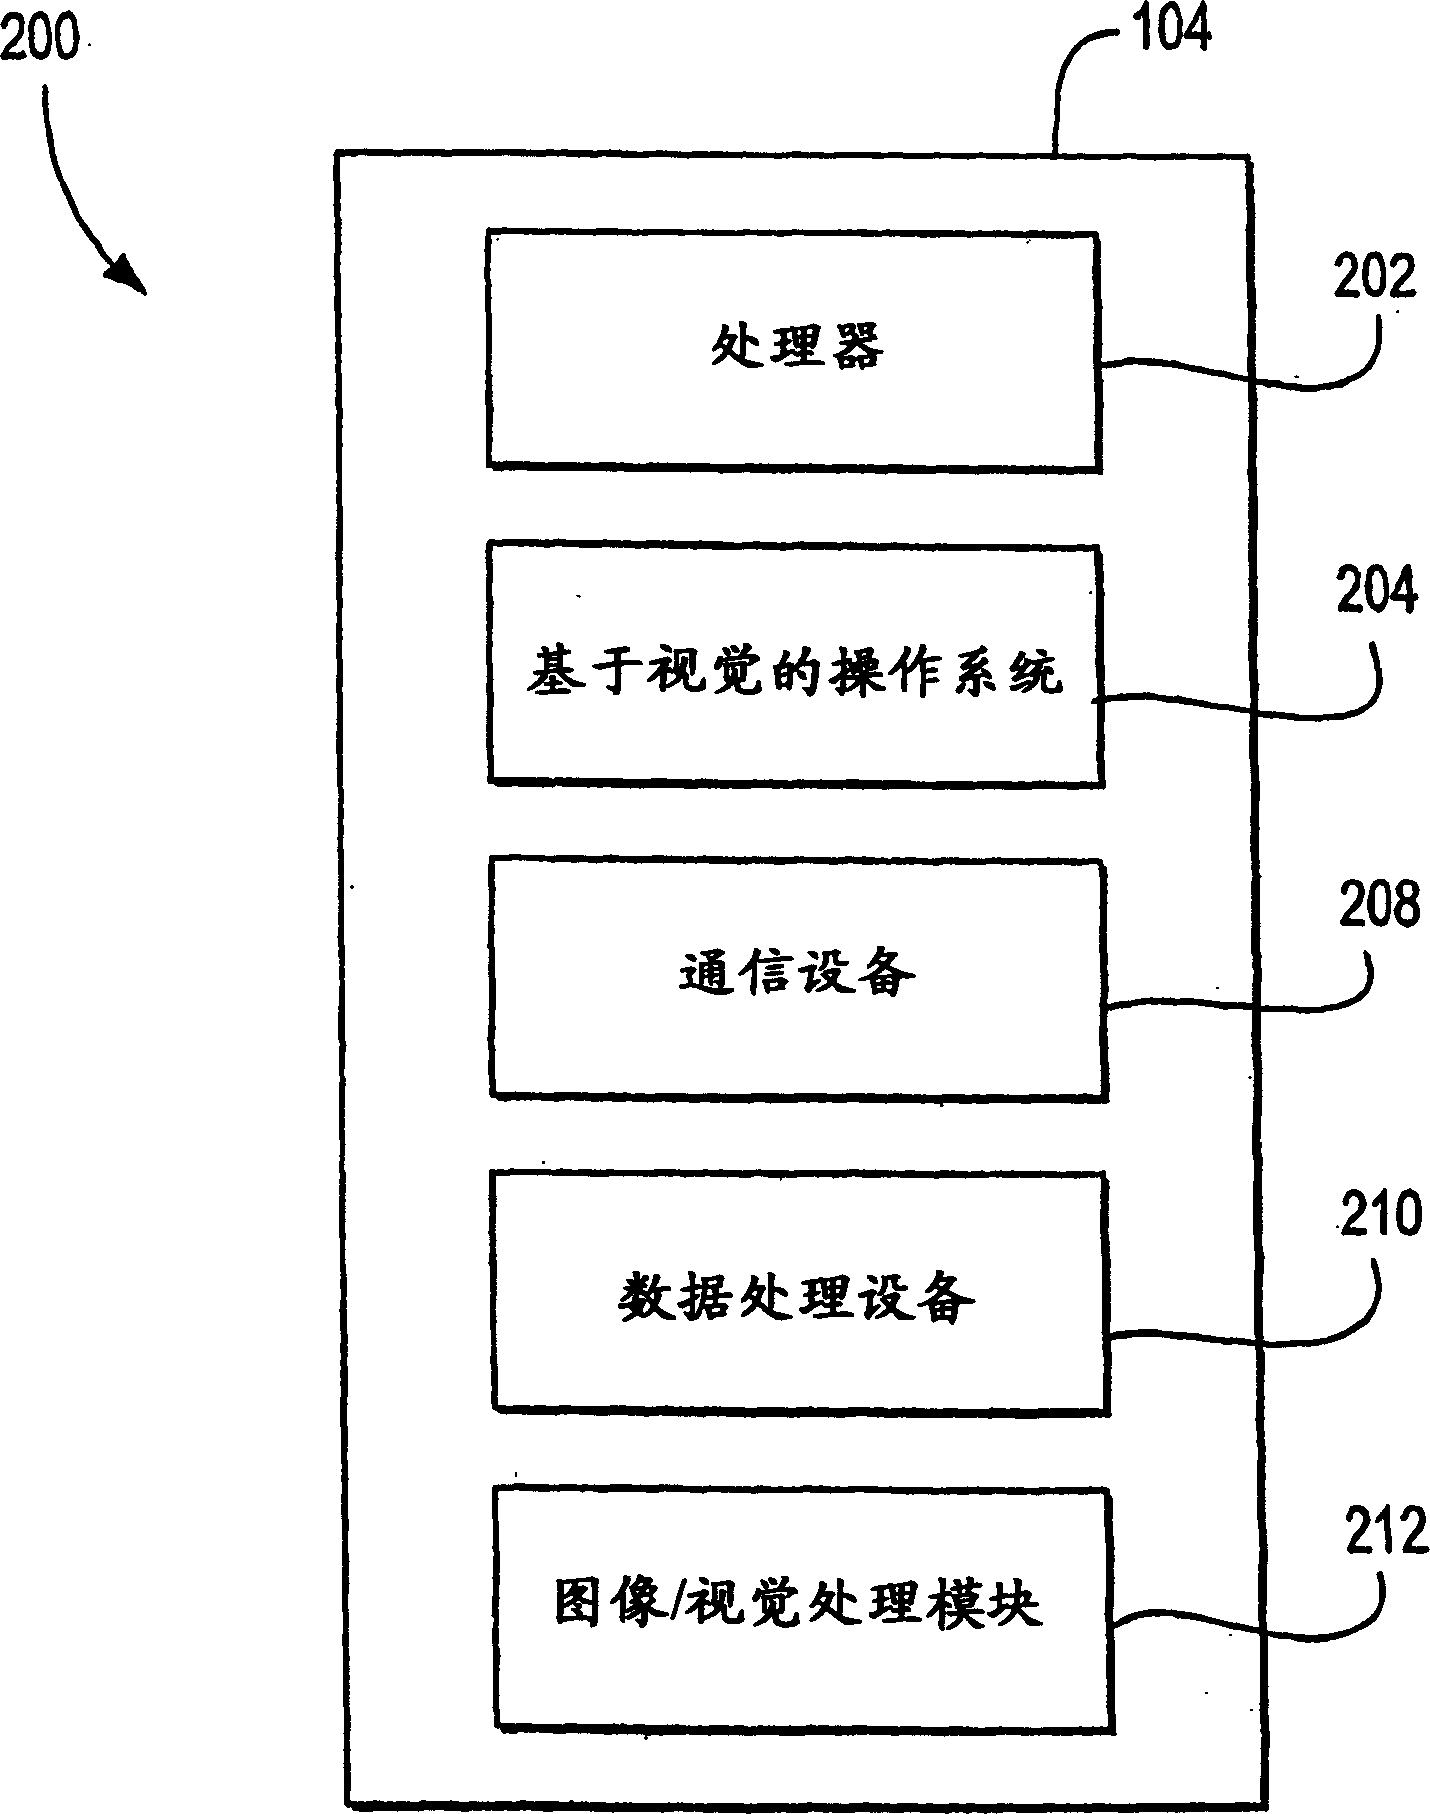 Vision-based operating method and system